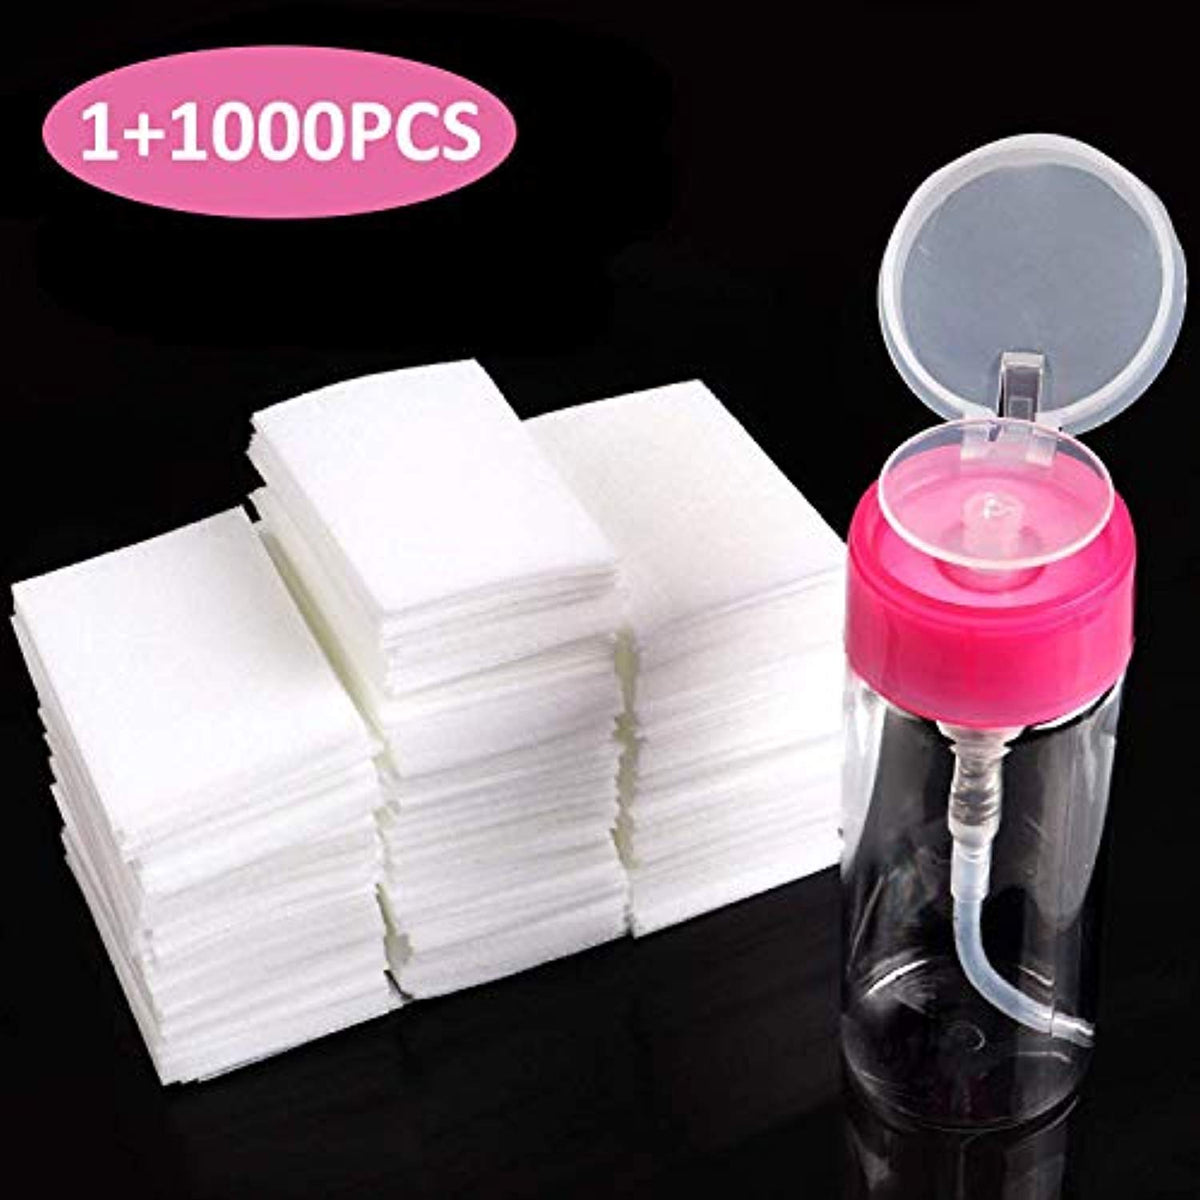 China Pump Dispenser Nail Polish Remover Suppliers, Manufacturers - Factory  Direct Wholesale - CAIYUN